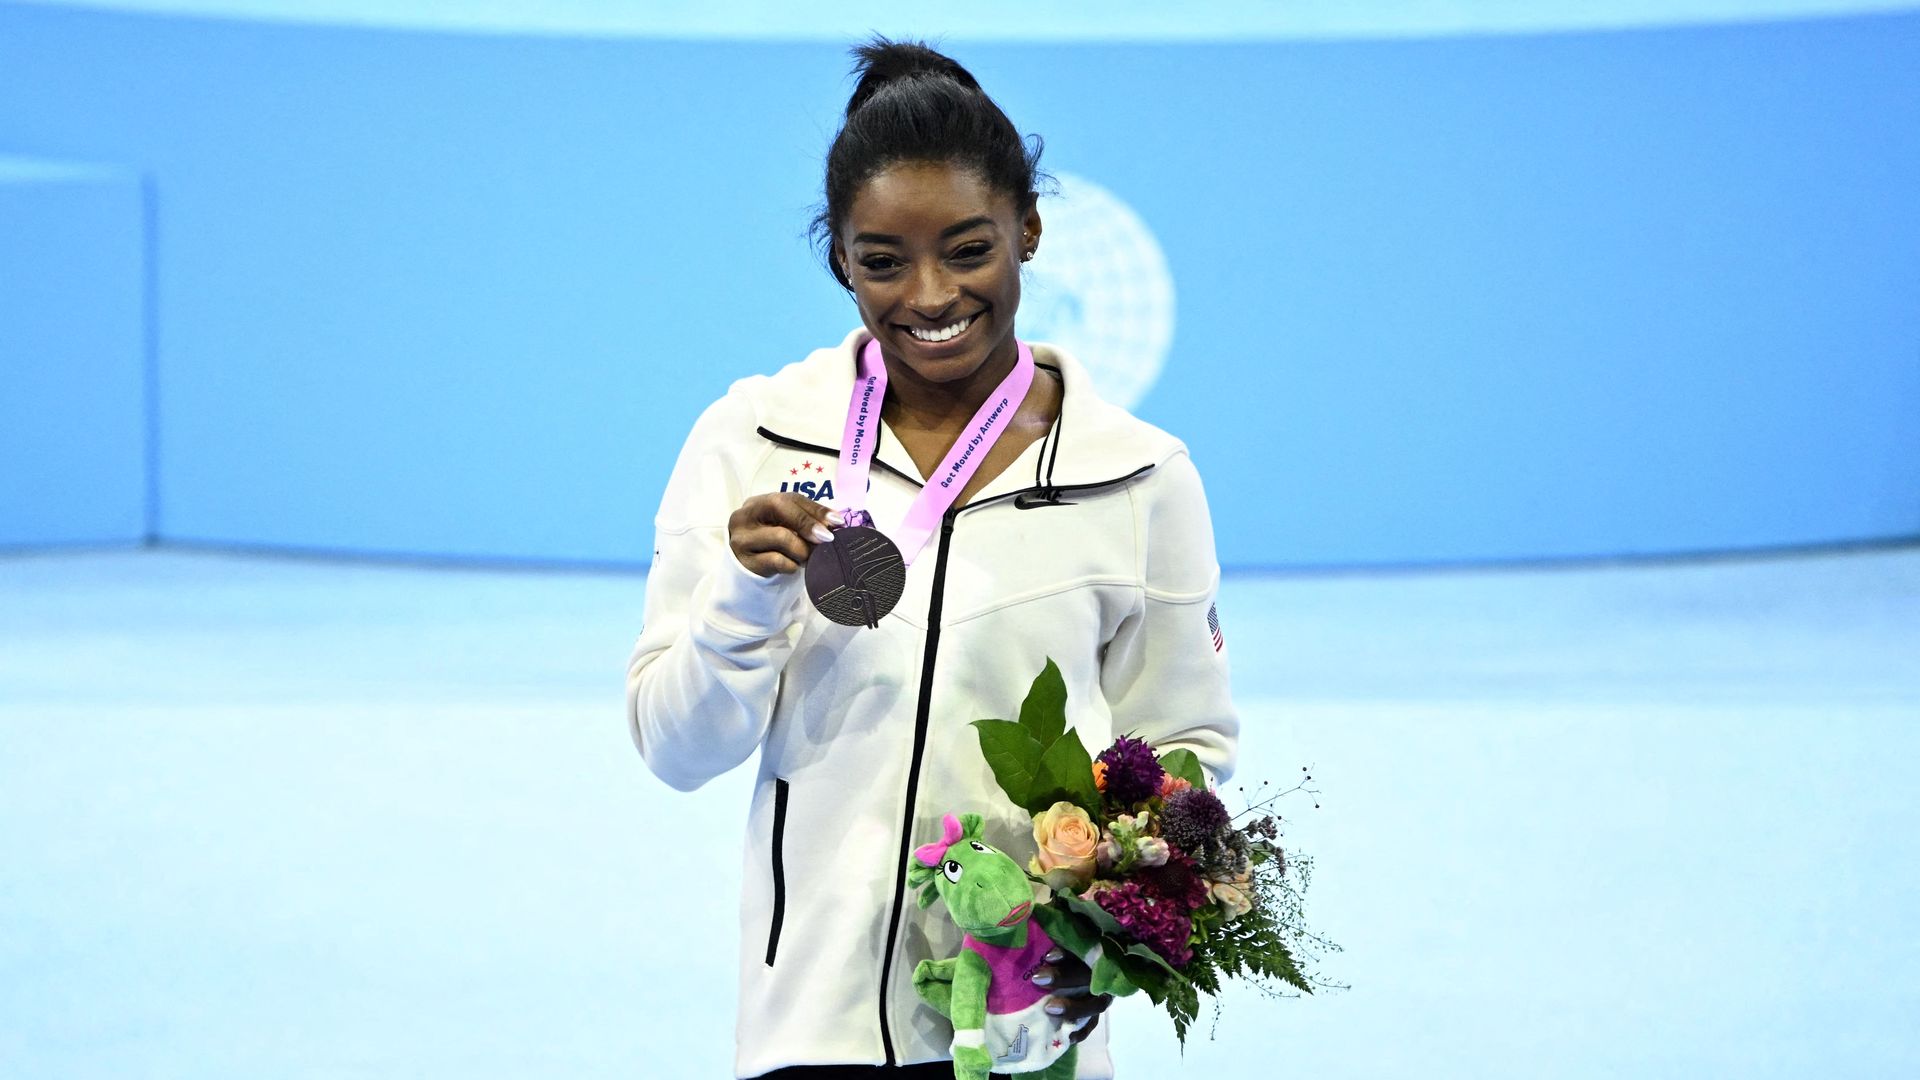 Simone Biles Becomes the Most Decorated Gymnast After Winning Gold